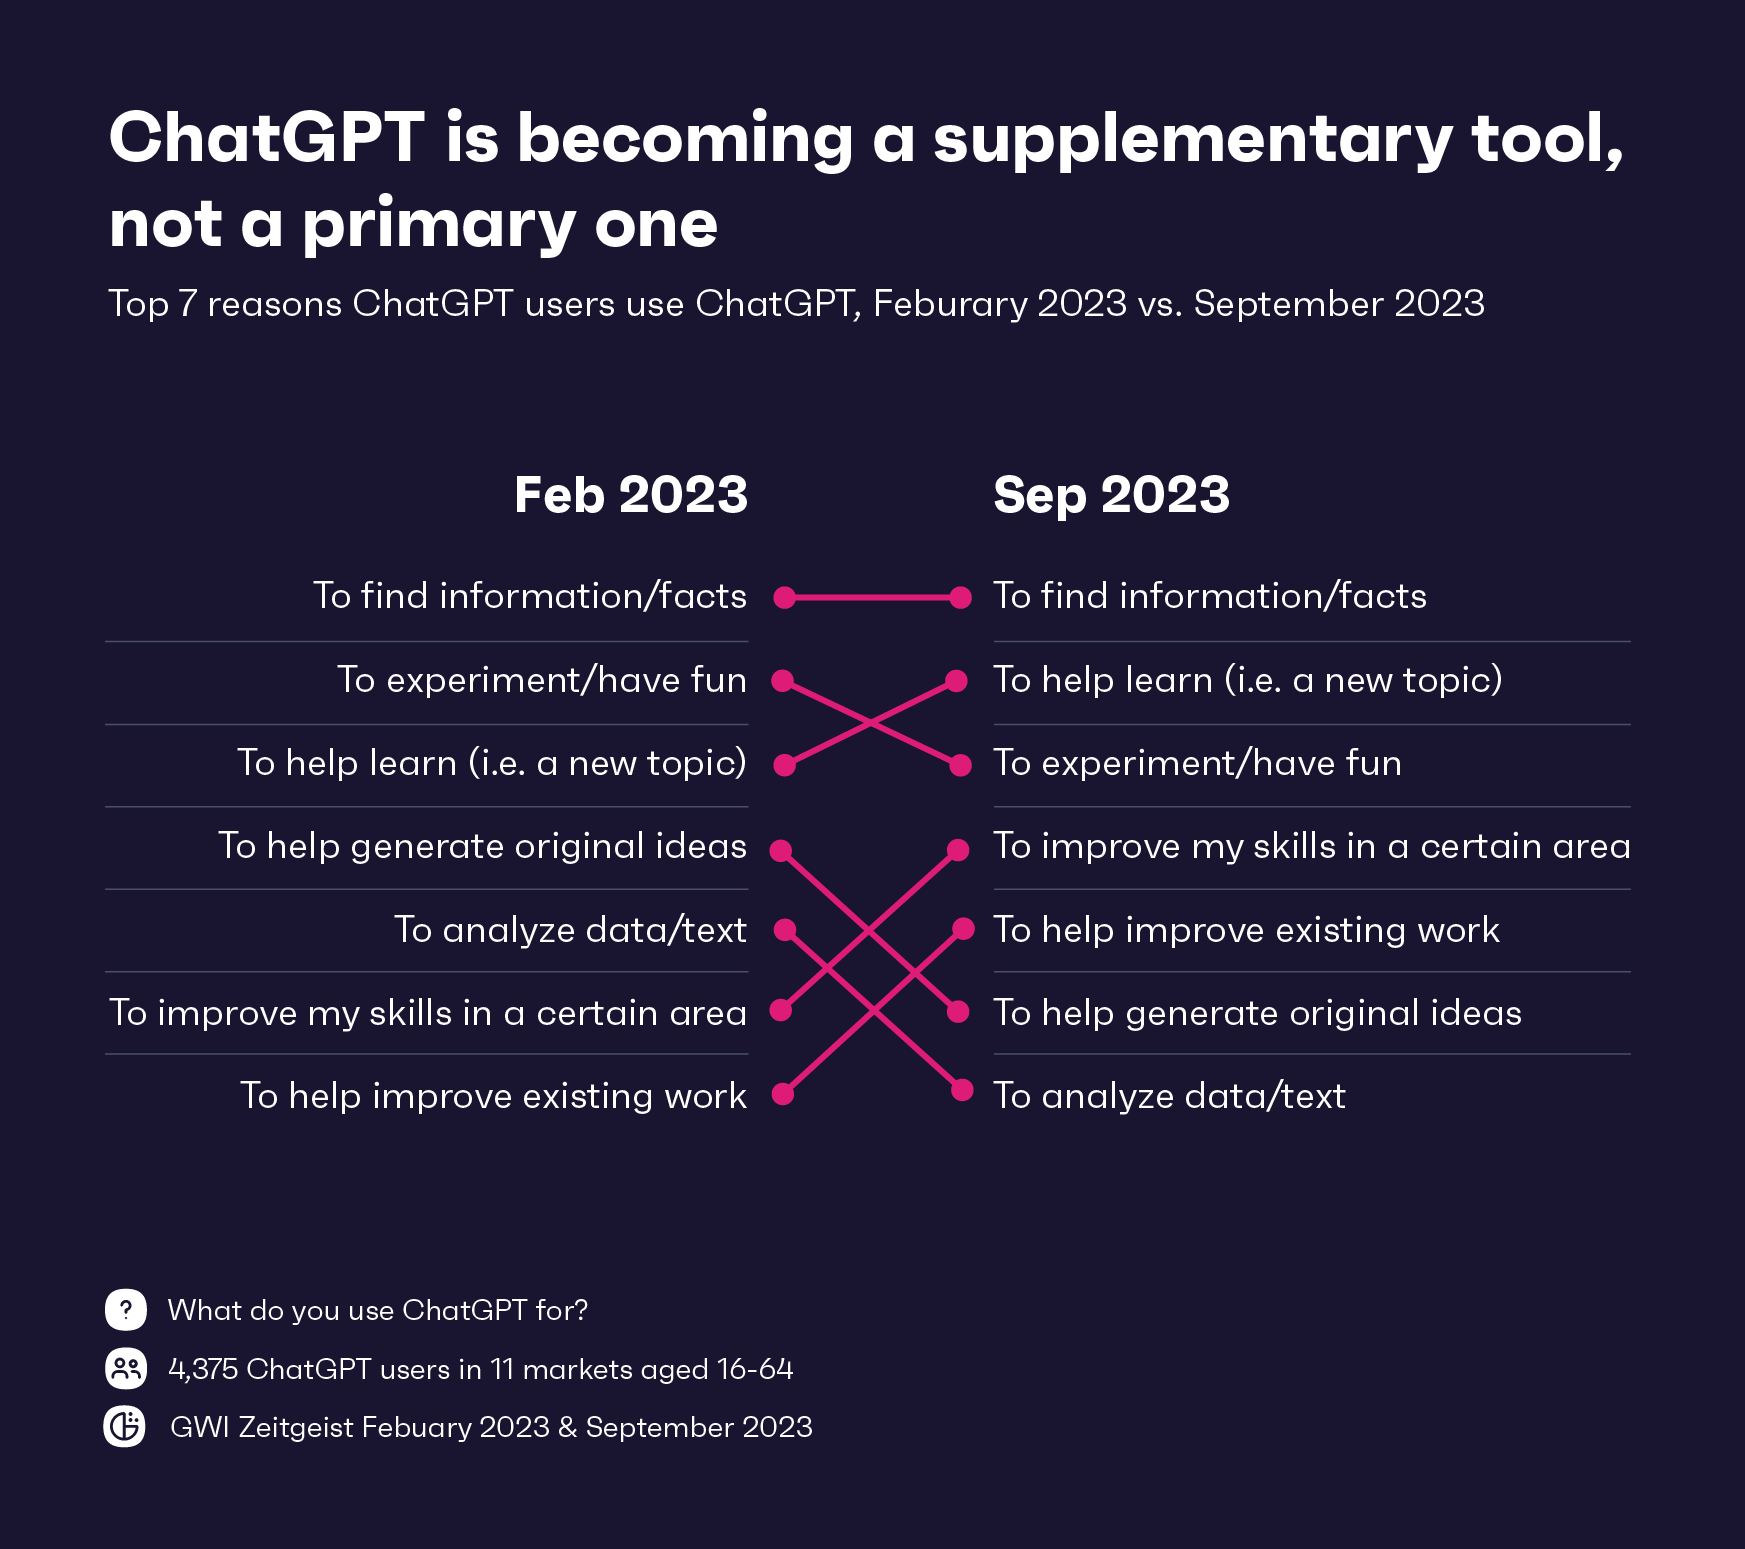 Chart showing reasons why people use ChatGPT